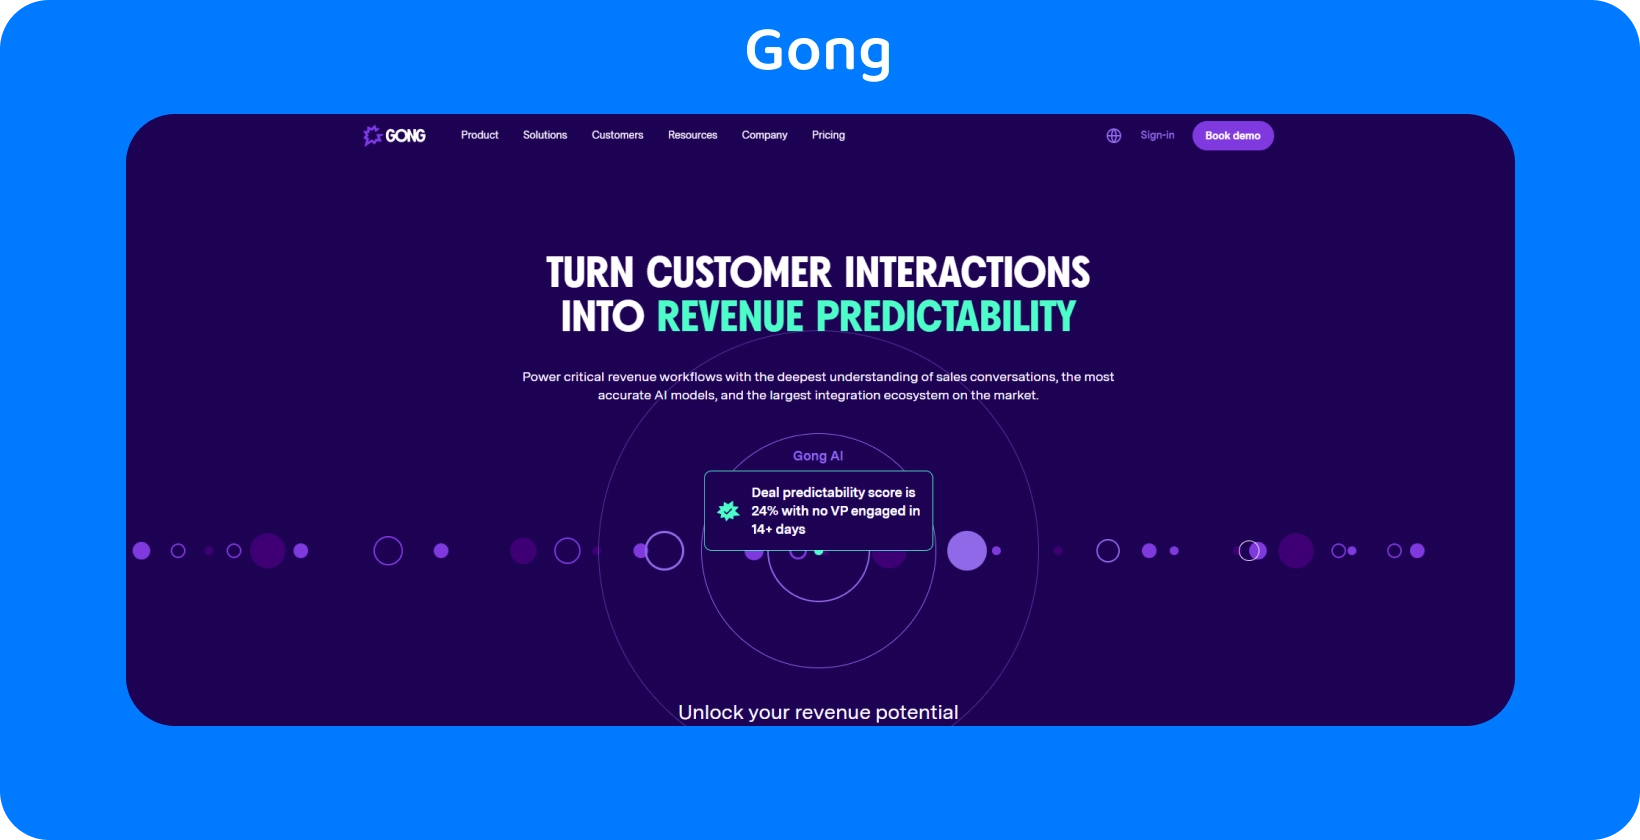 Gong's interface highlighting customer interaction conversion into revenue predictability, utilizing AI for sales.